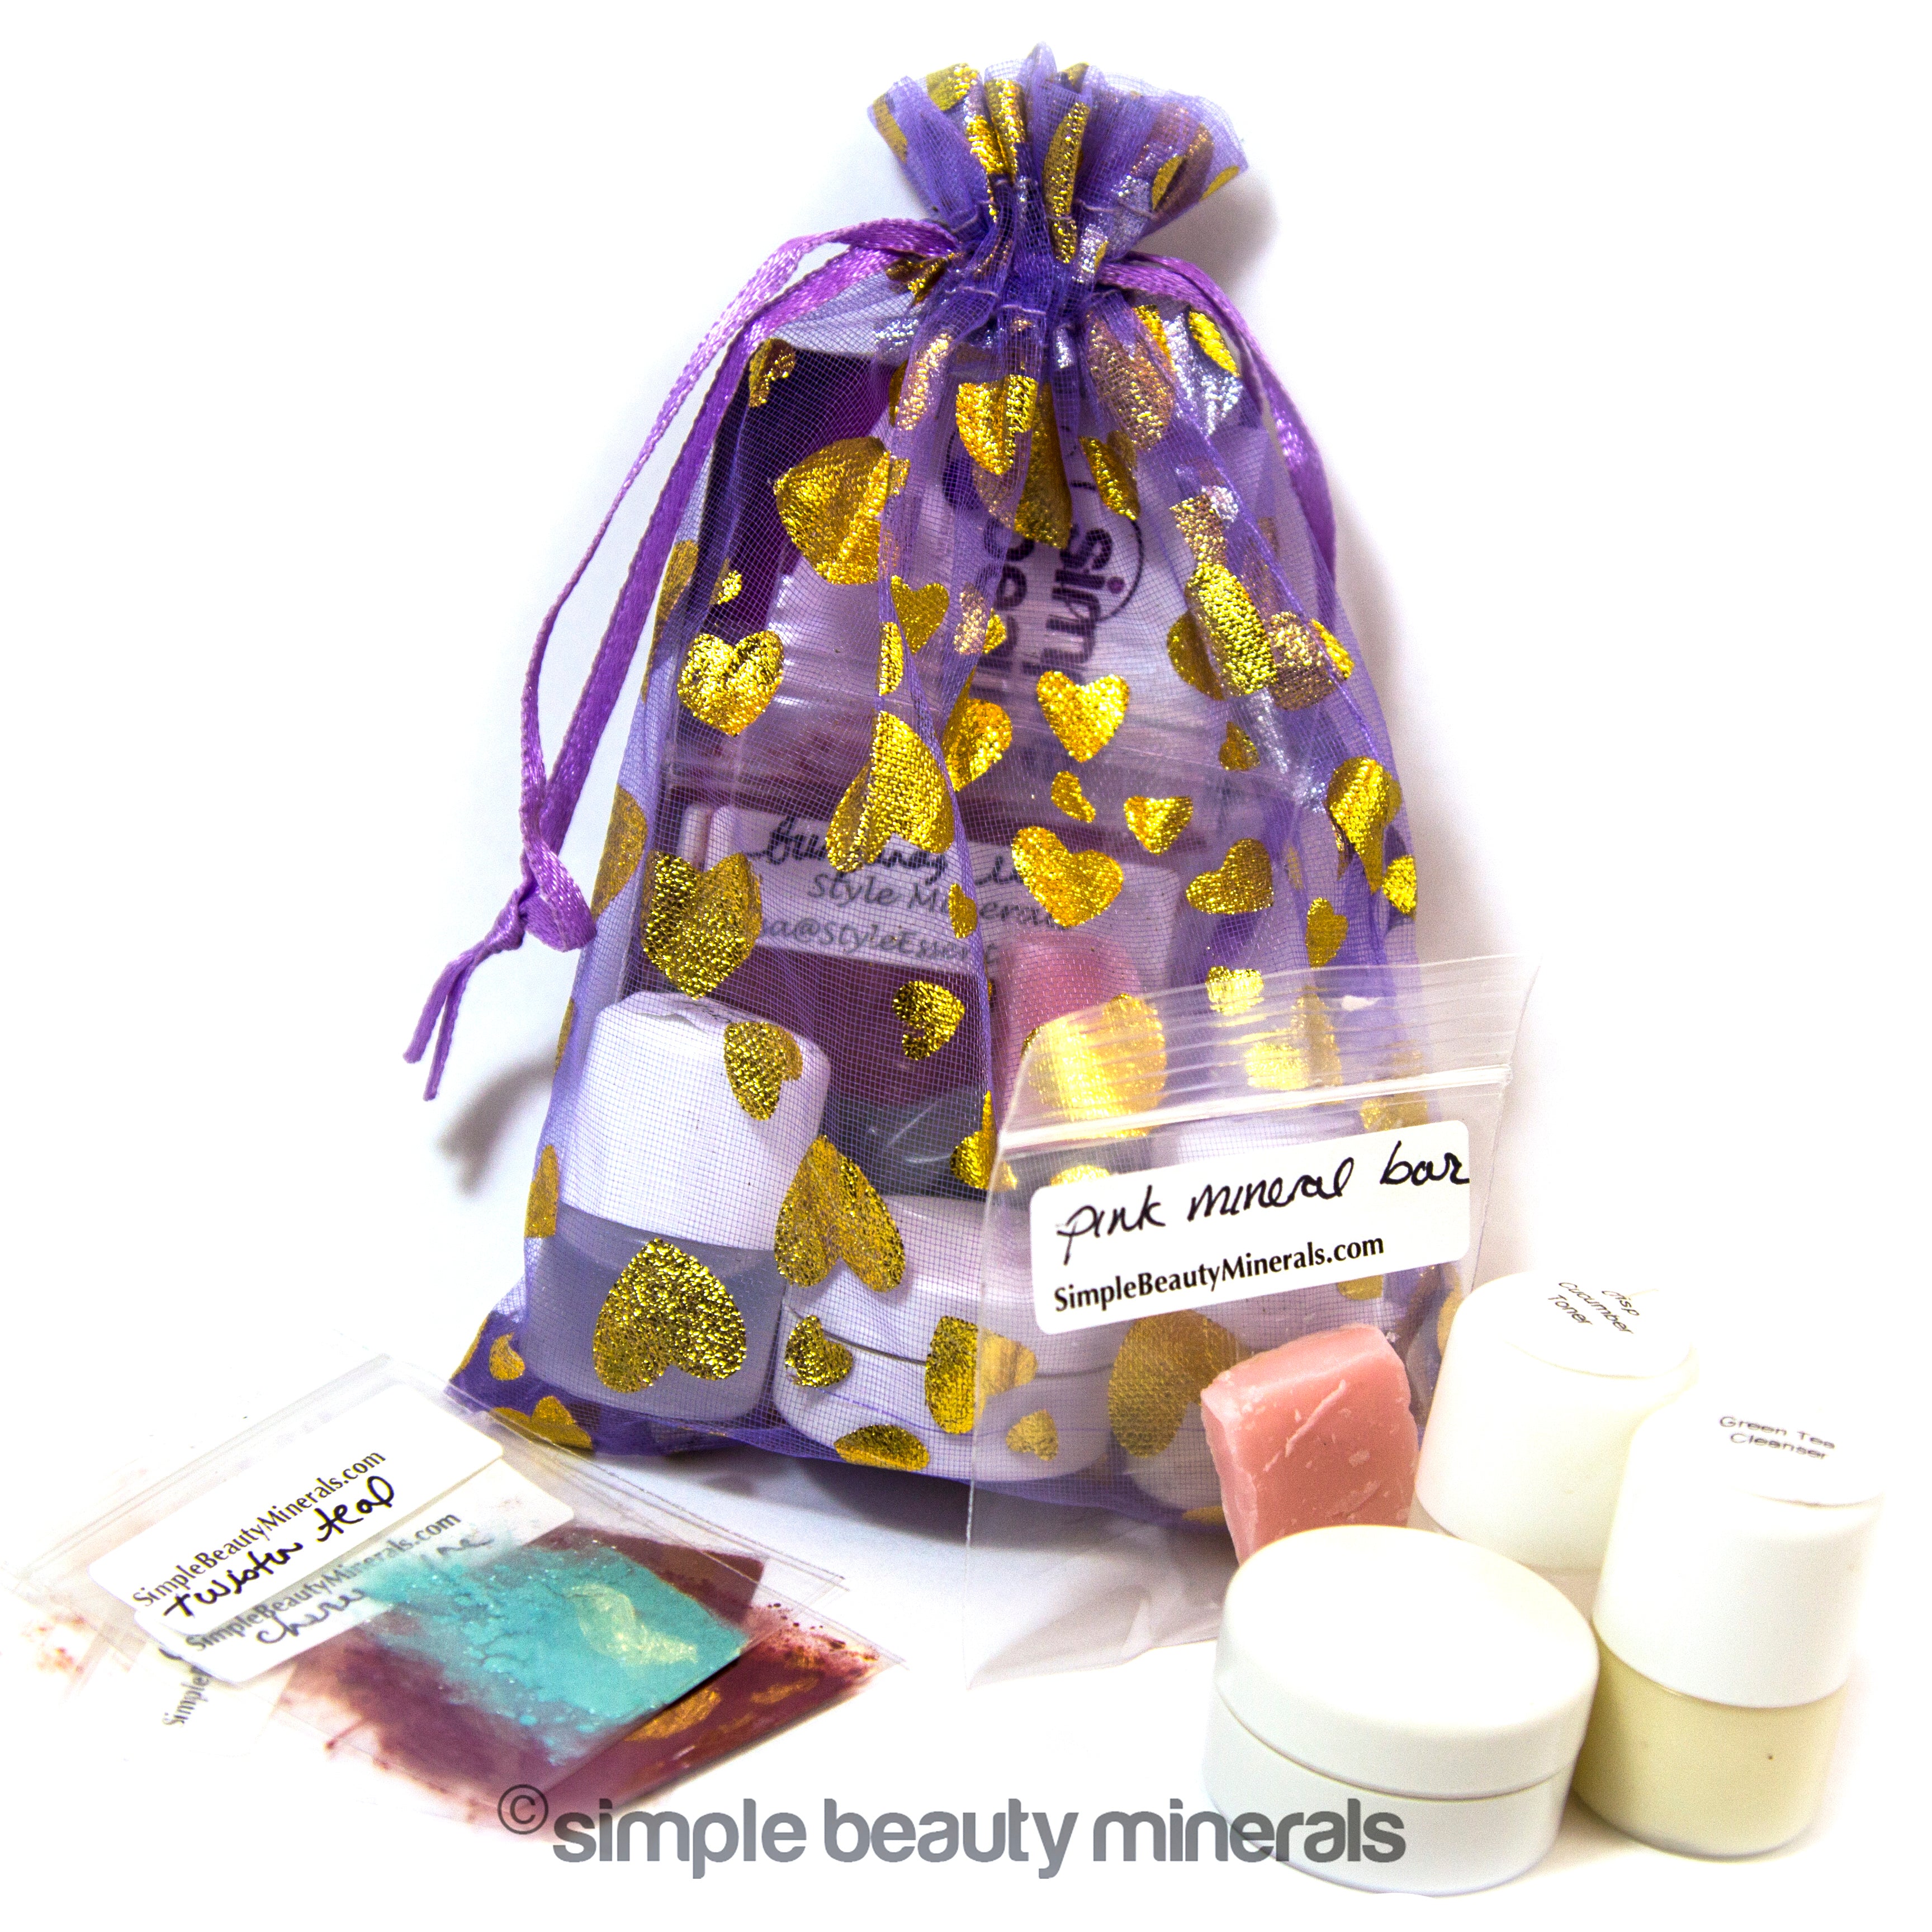 Simple Beauty Minerals - Custom Mineral Makeup Samples Packet